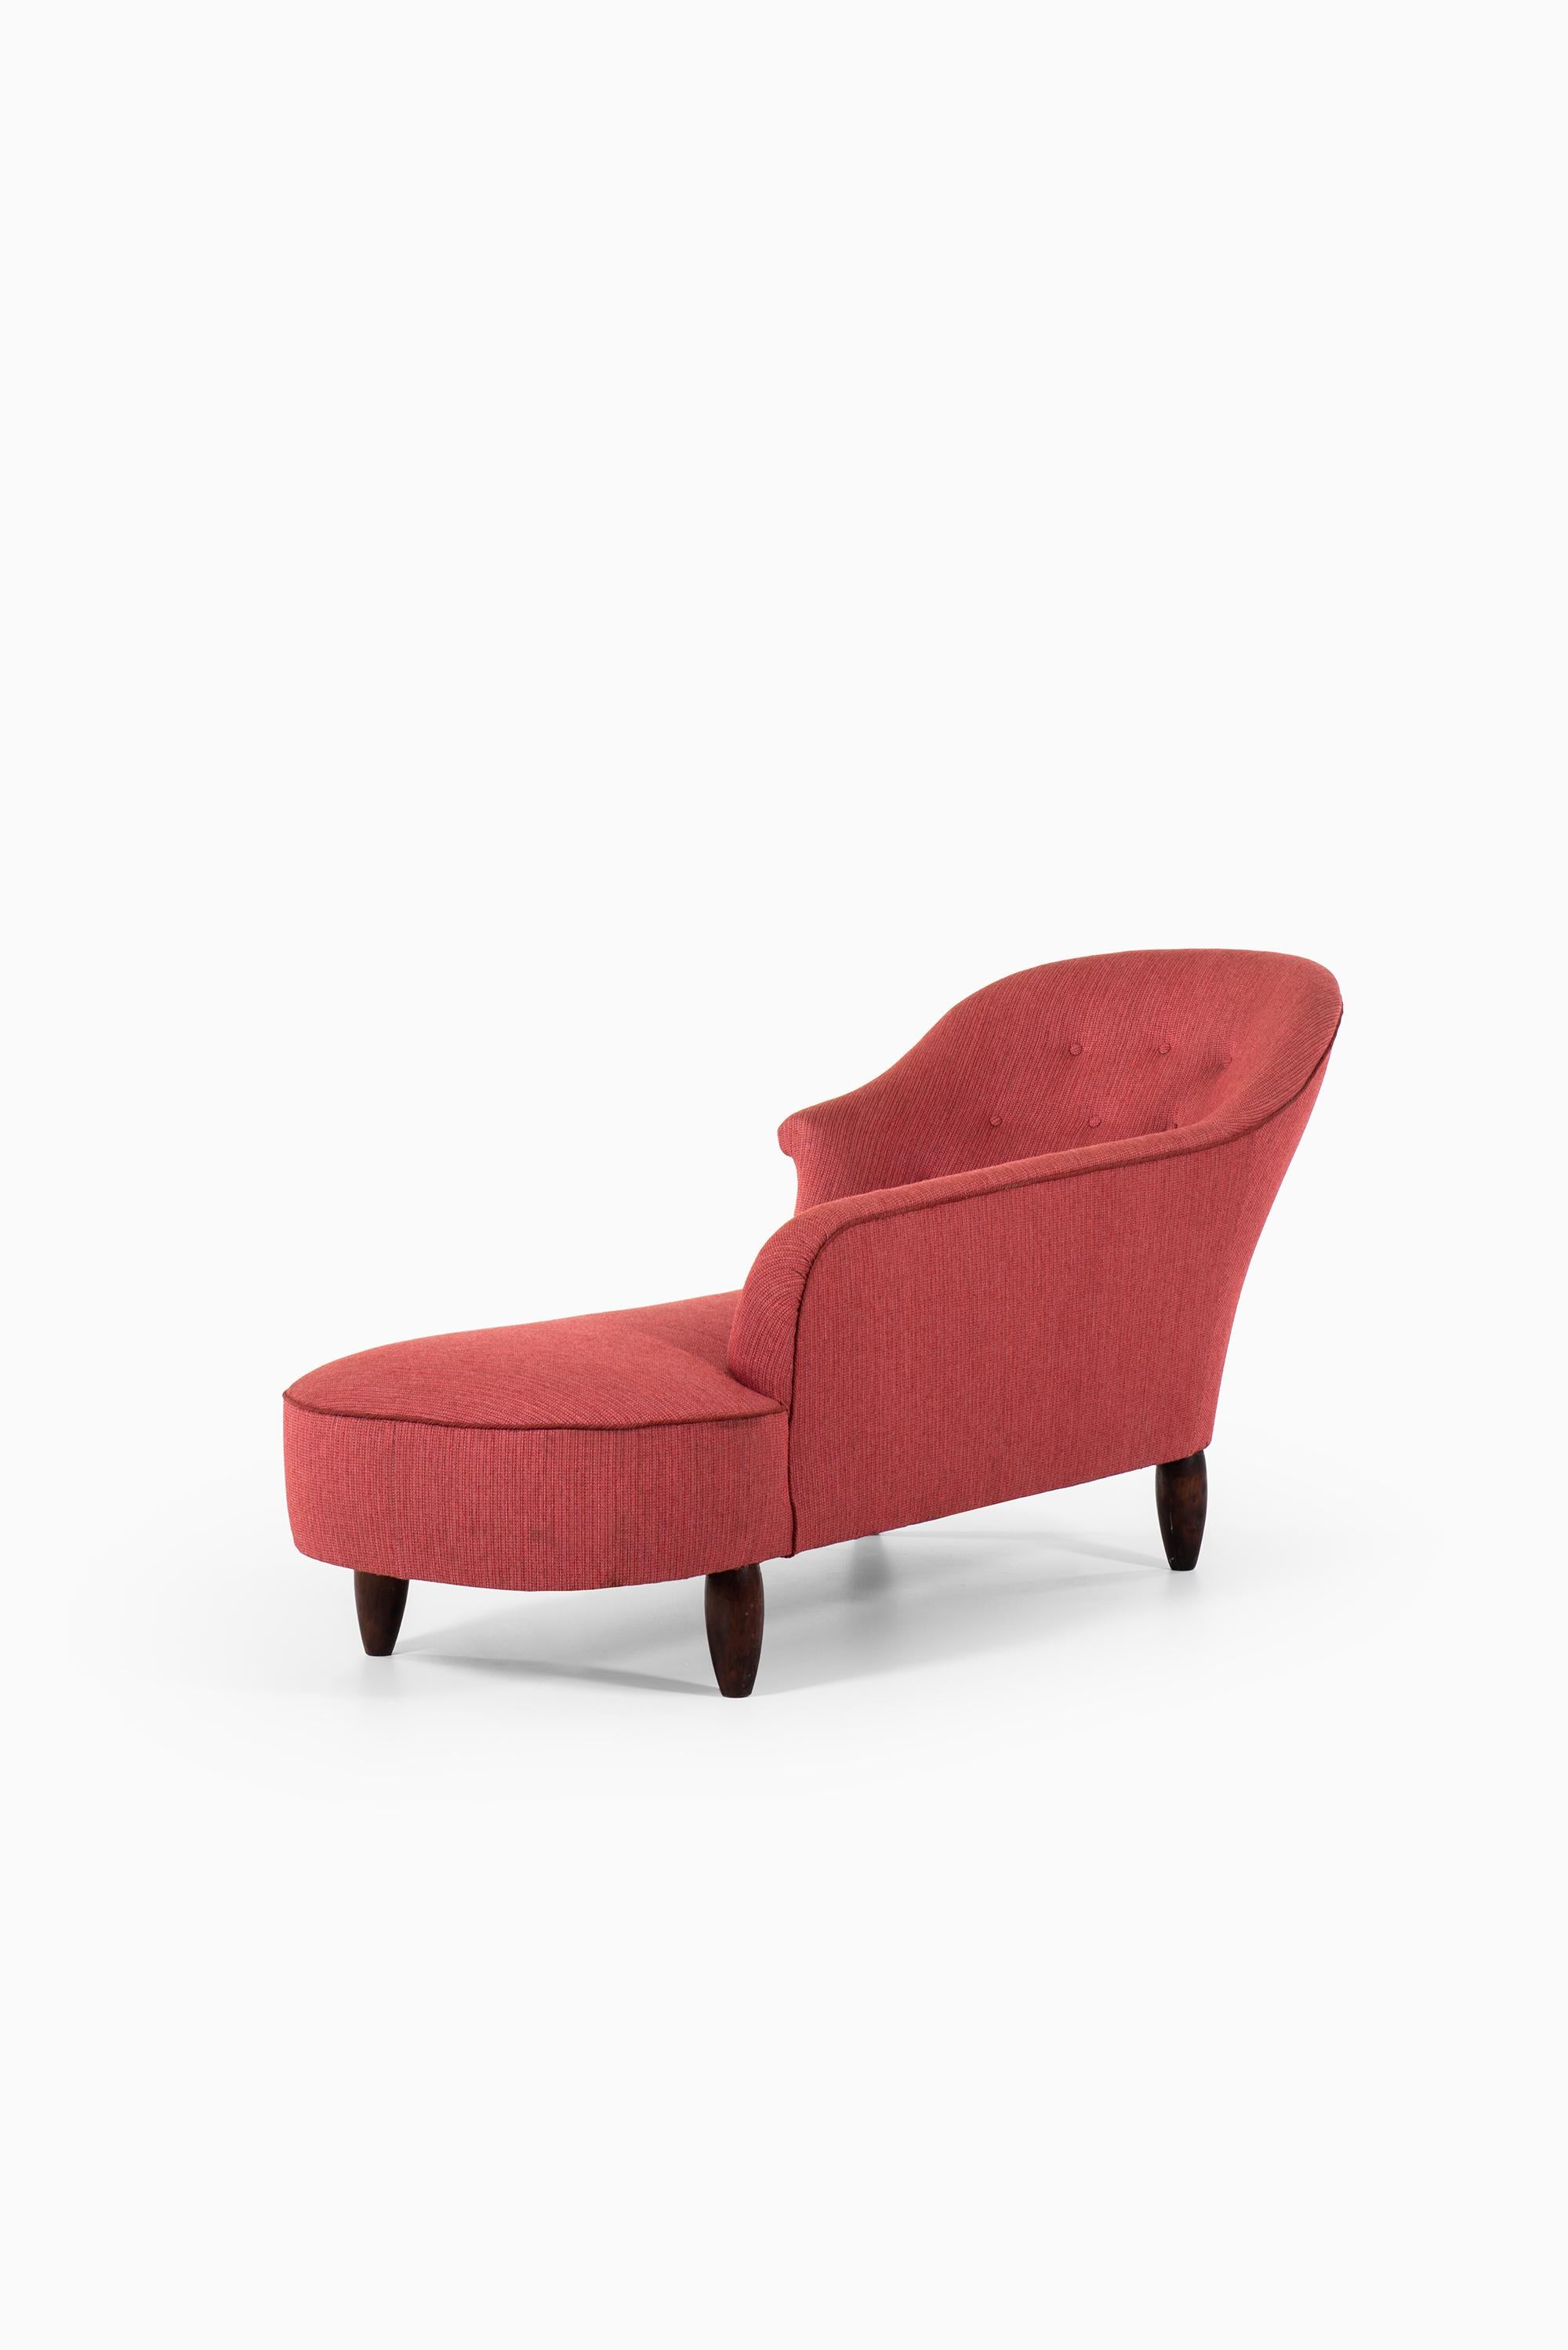 Swedish Large Chaise Lounge Produced in Sweden